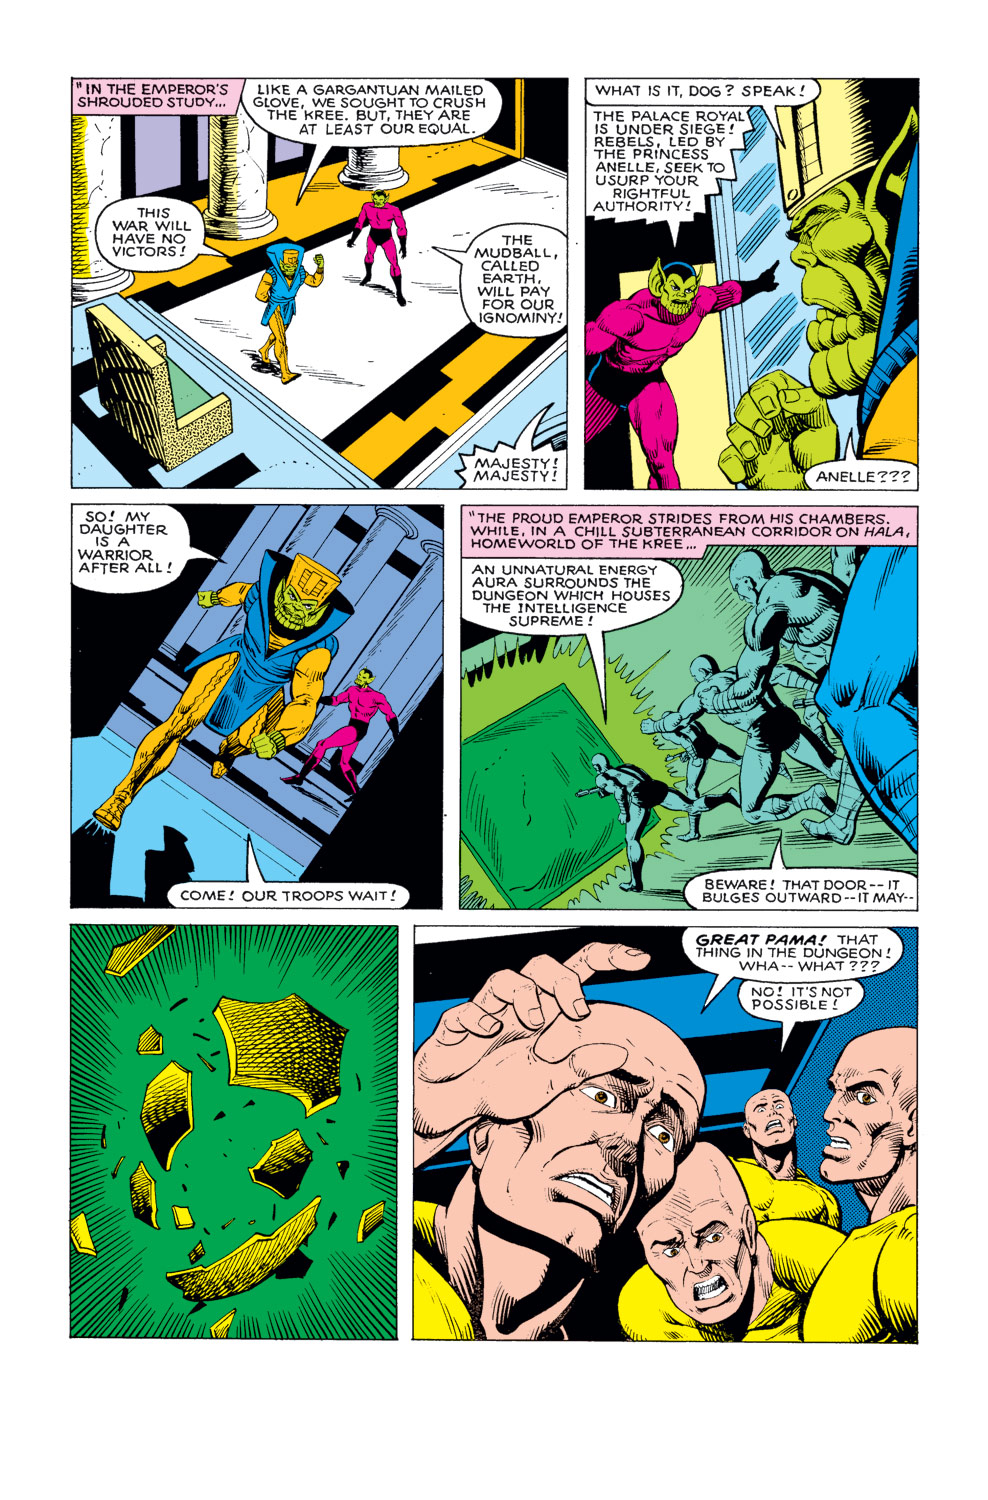 What If? (1977) issue 20 - The Avengers fought the Kree-Skrull war without Rick Jones - Page 32